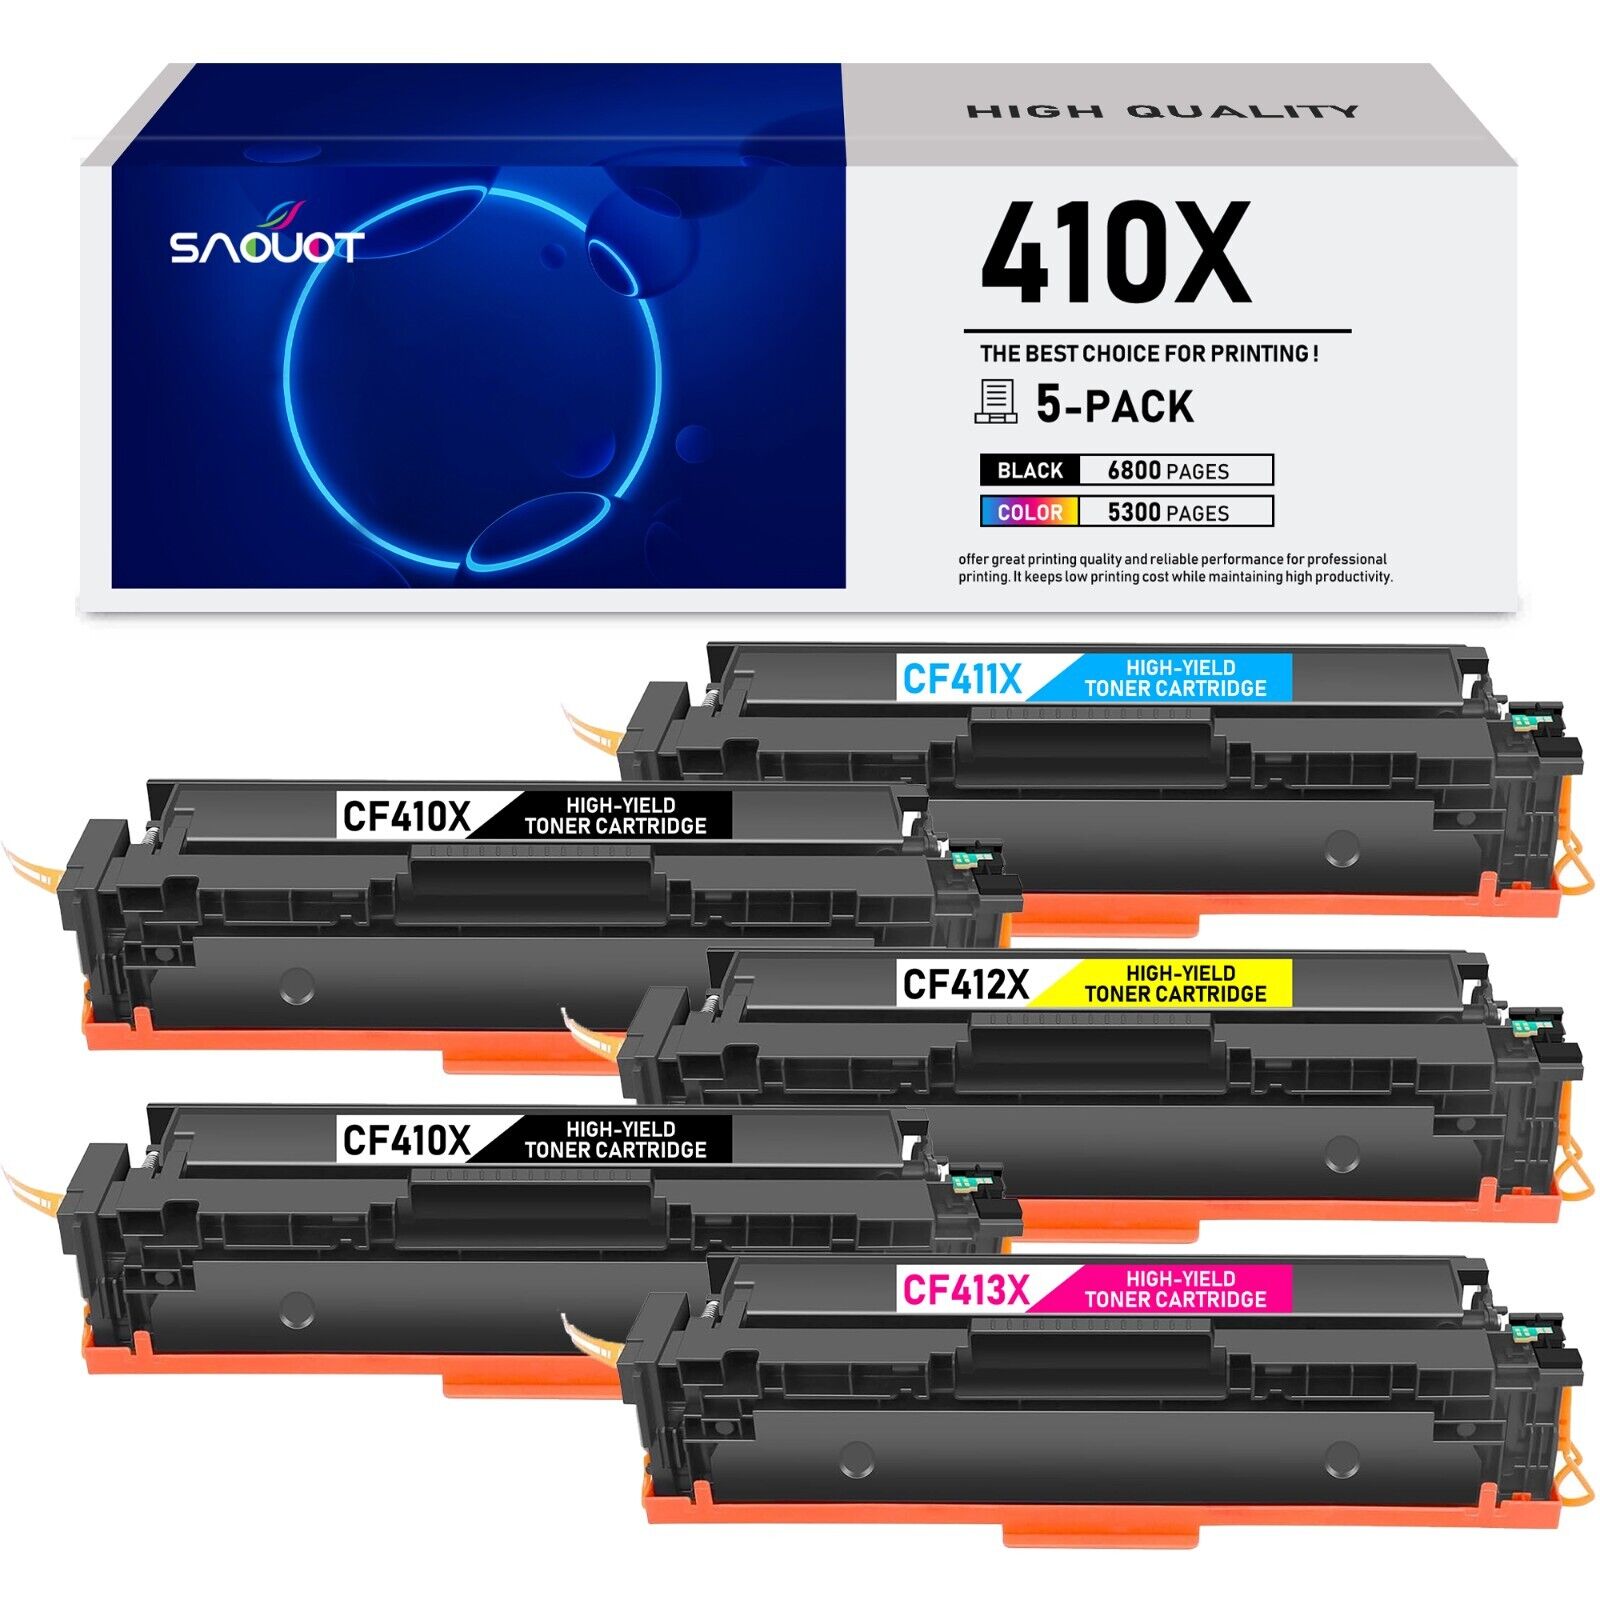 410X Toner Cartridge Replacement for HP CF410X M452DN M452DW M452NW MFP M377DW